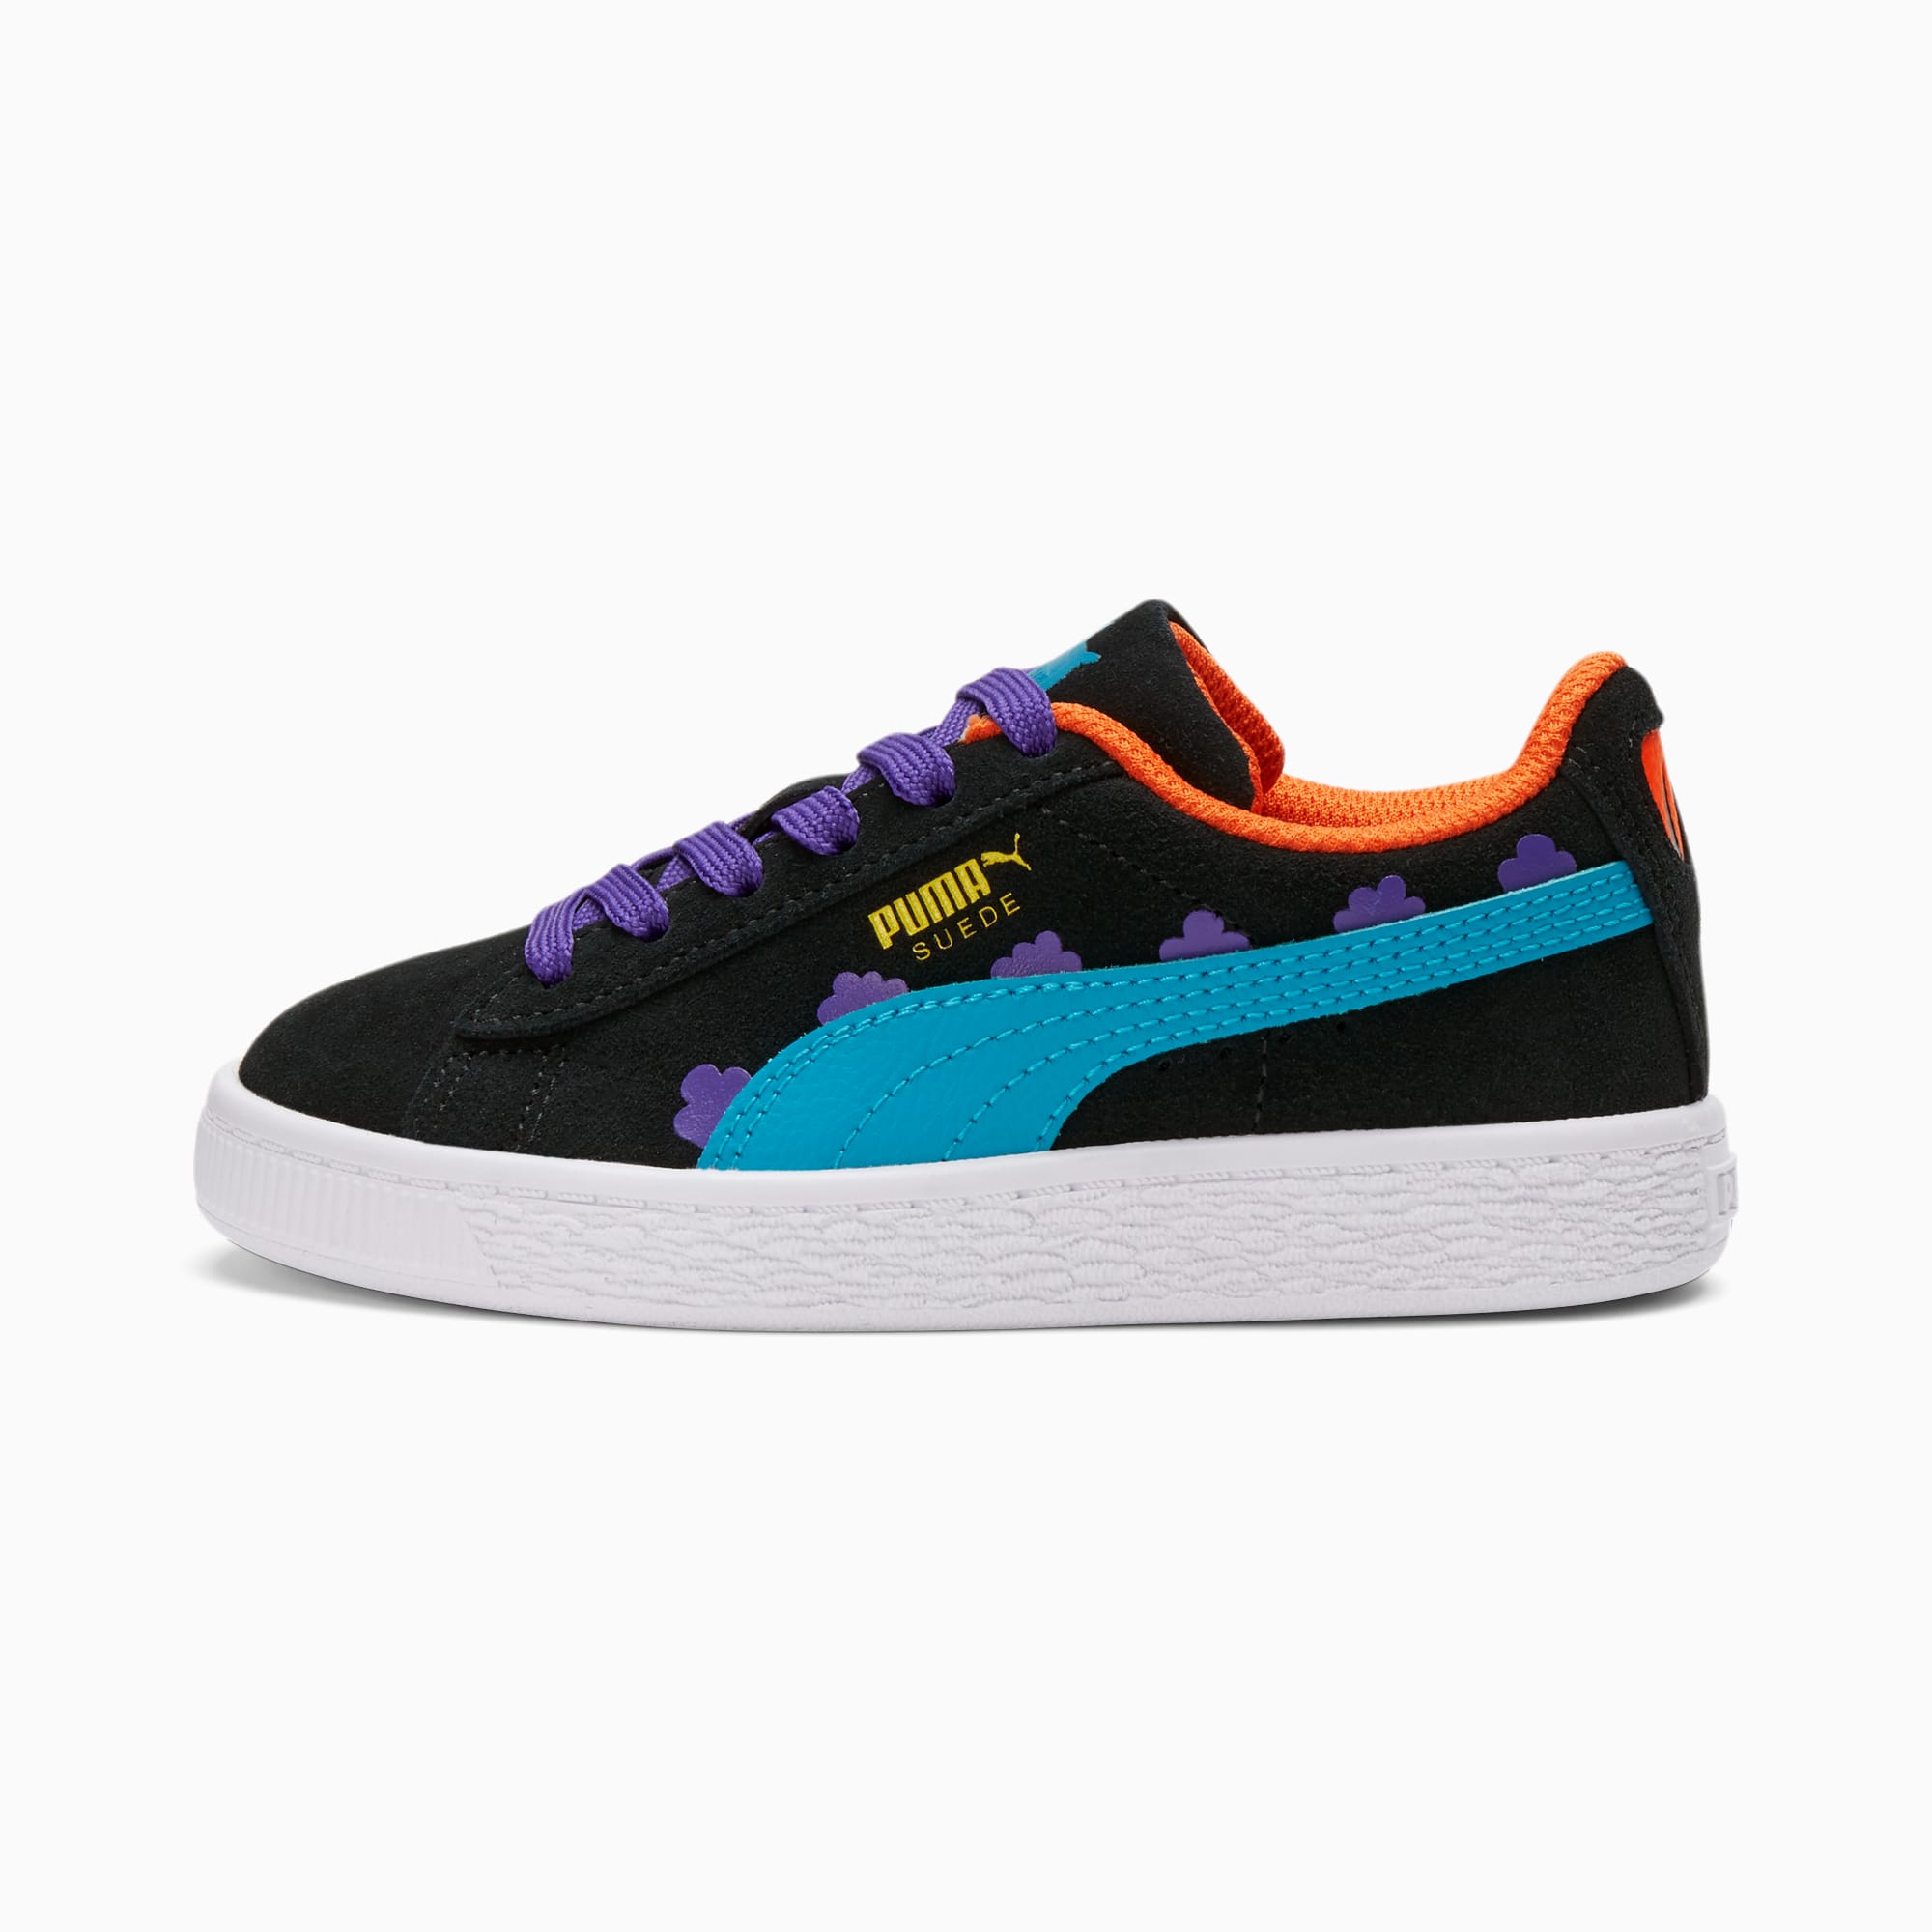 Puma X Rugrats Suede Little Kids, Please Take Your Shoes Off Rugrats